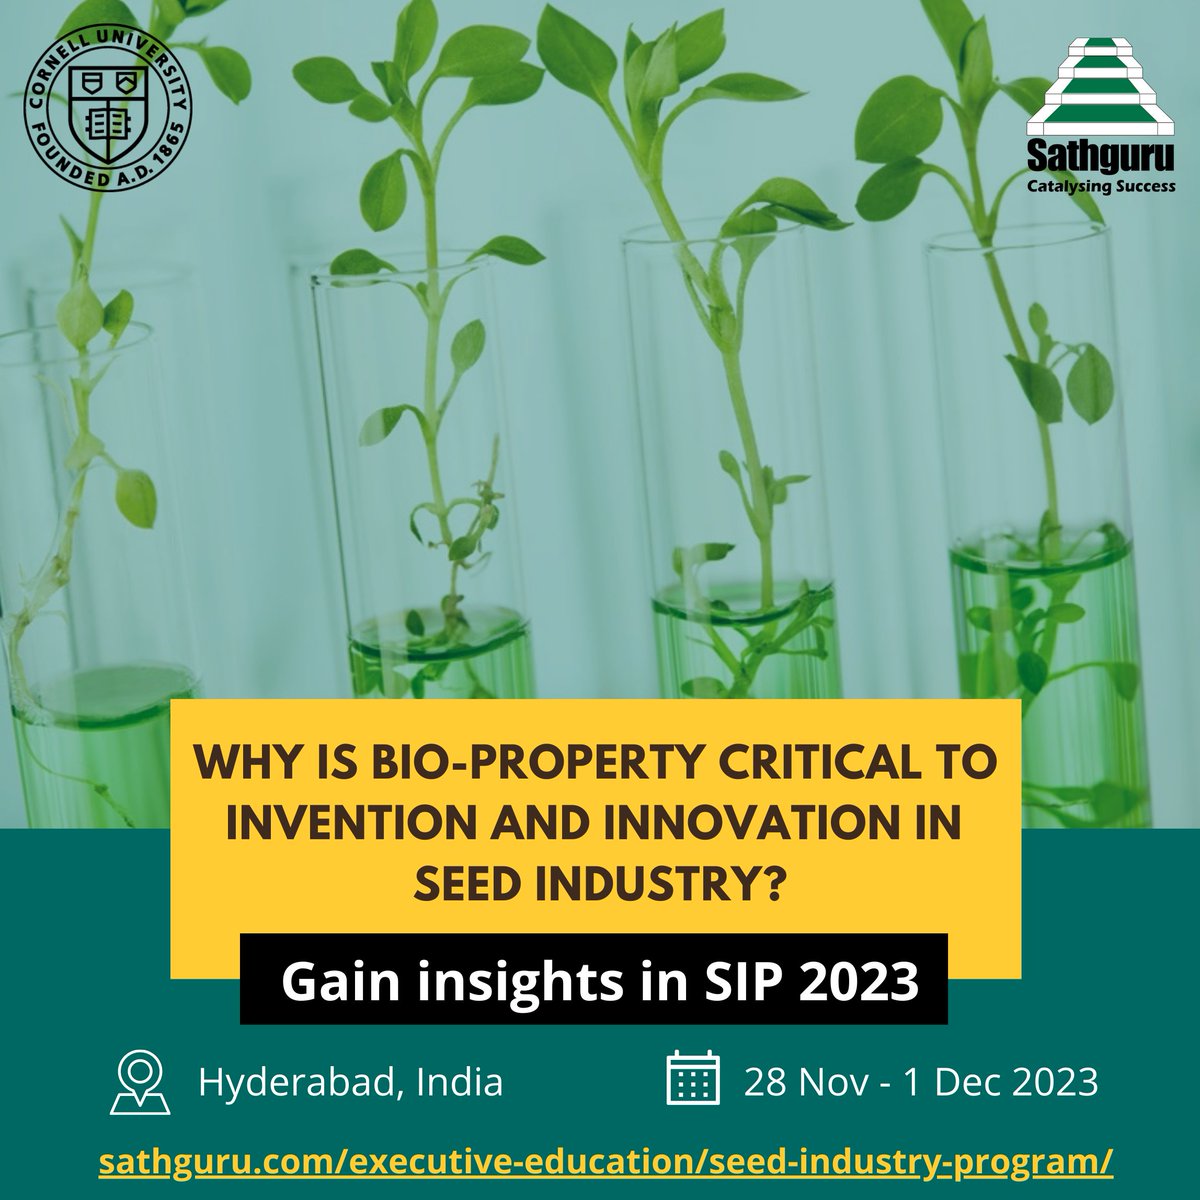 Bio-property is a crucial element that helps to drive innovation, competition & progress in #agriculture & #foodproduction. Explore critical insights on #bioproperty in the #seedindustry by joining Seed Industry Program.

Learn more: lnkd.in/e3Ah8xiv

#executiveeducation